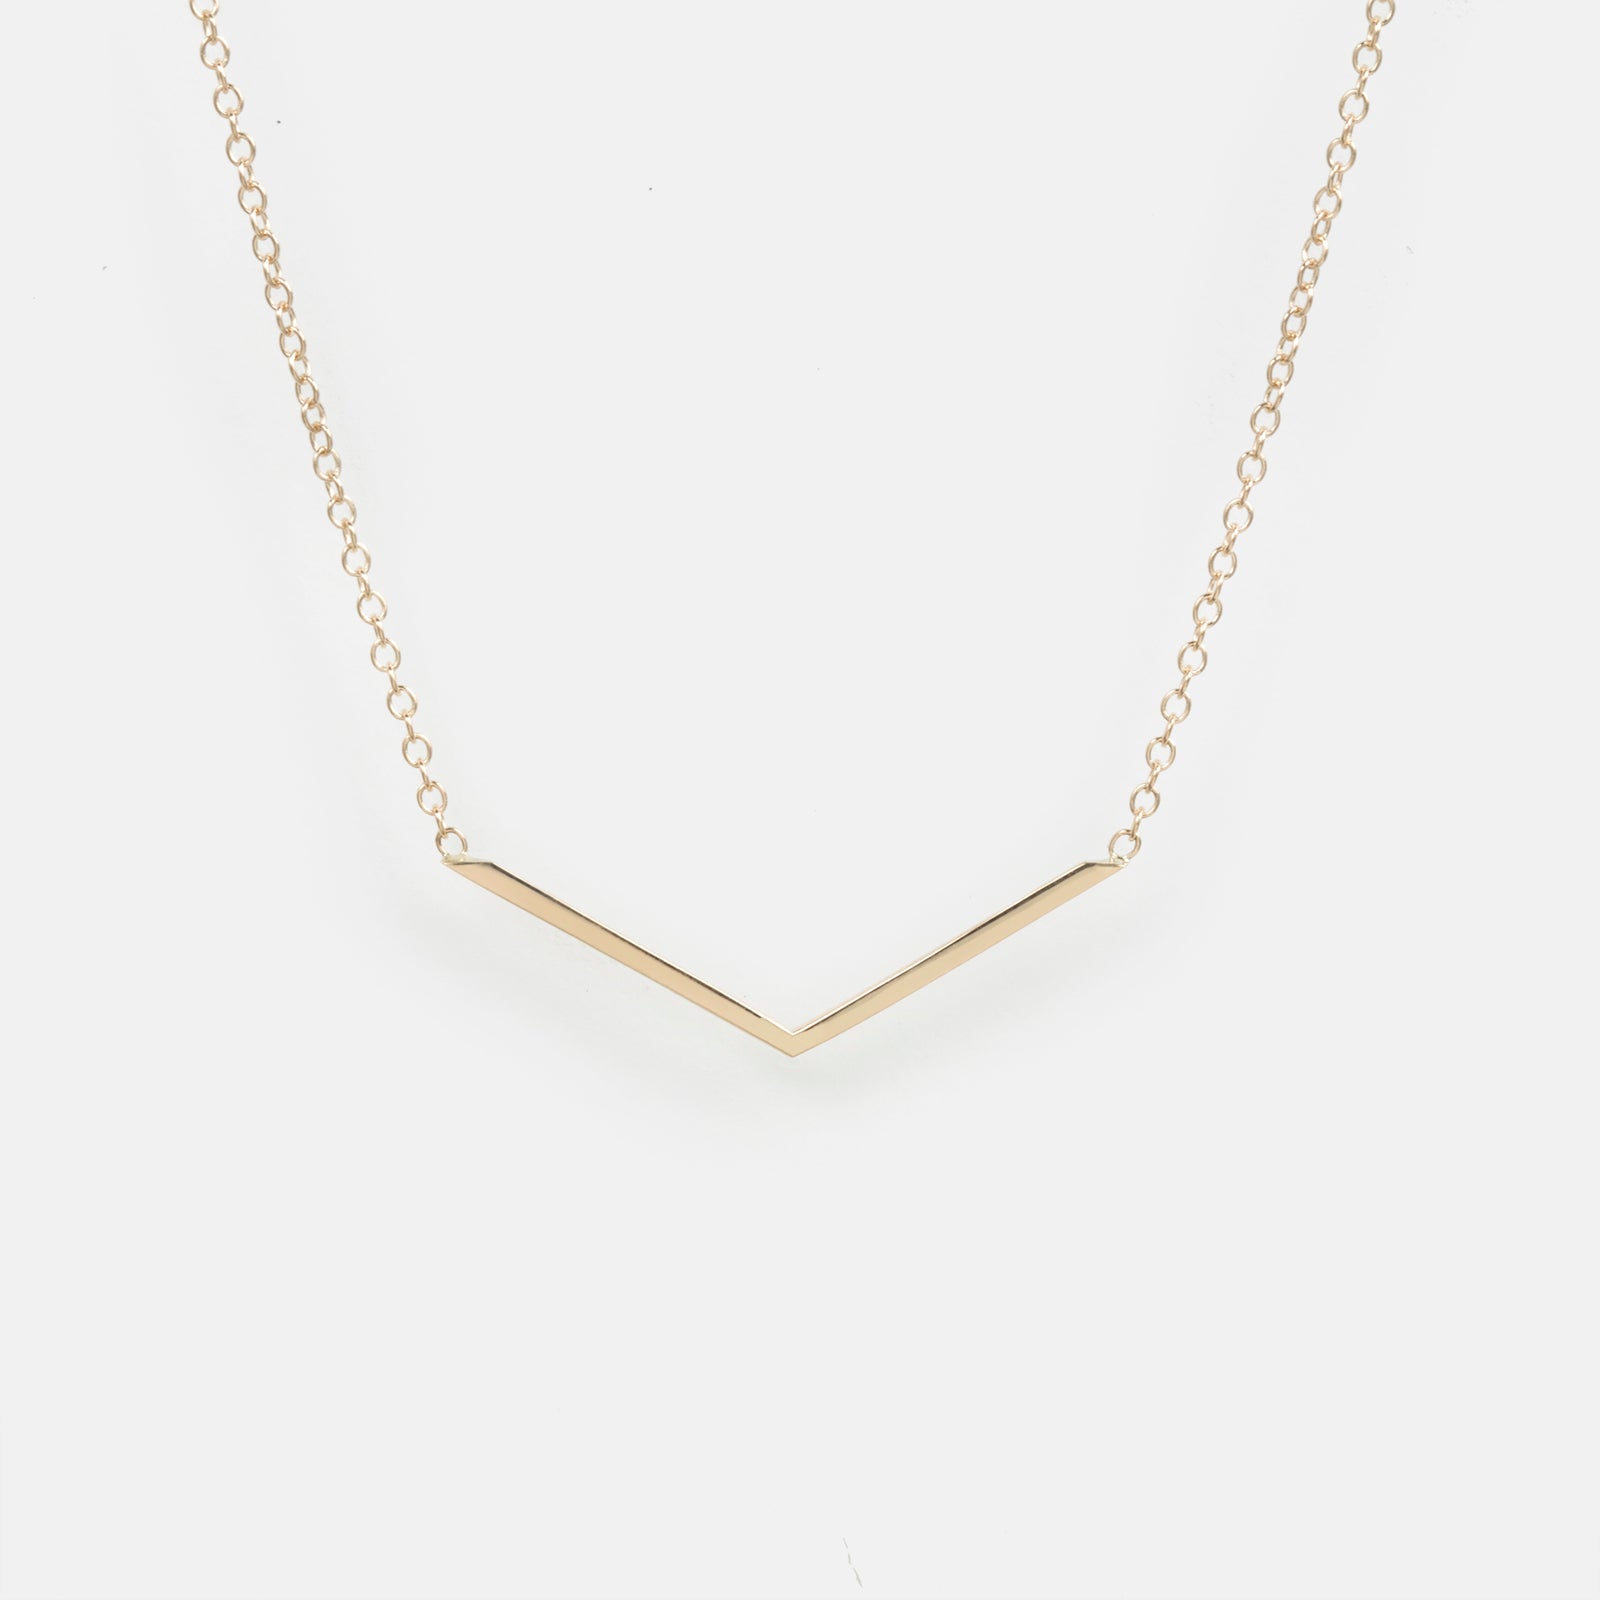 Avi Unique Necklace in 14k Gold By SHW Fine Jewelry NYC